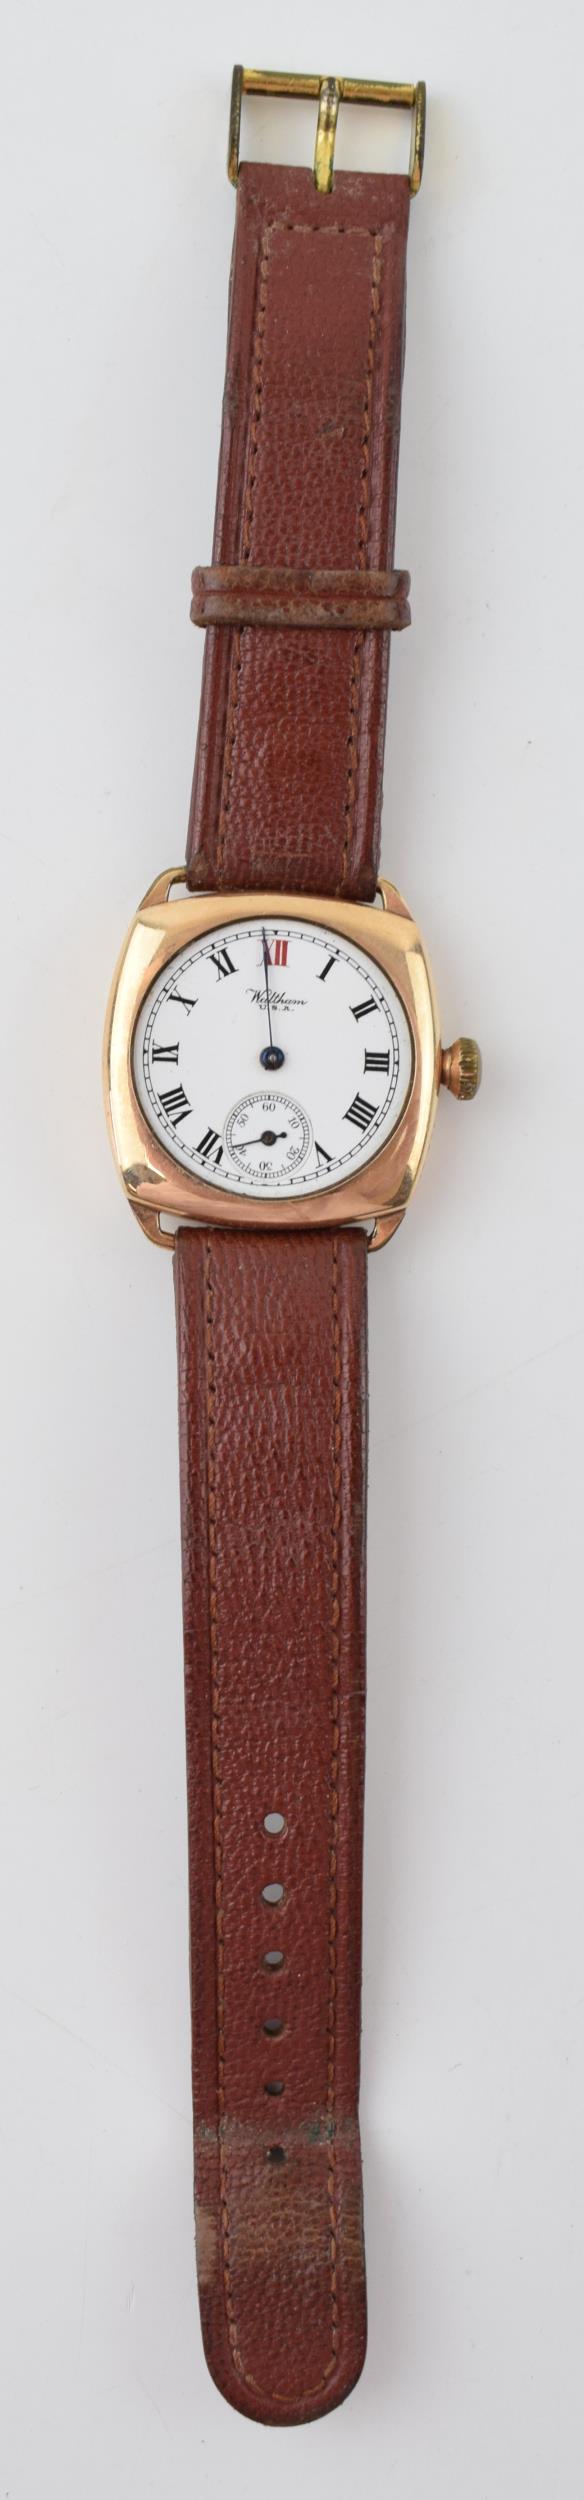 A gold plated gentleman's Waltham U.S.A manual winding wristwatch on brown leather strap. Watch a/f. - Image 2 of 3